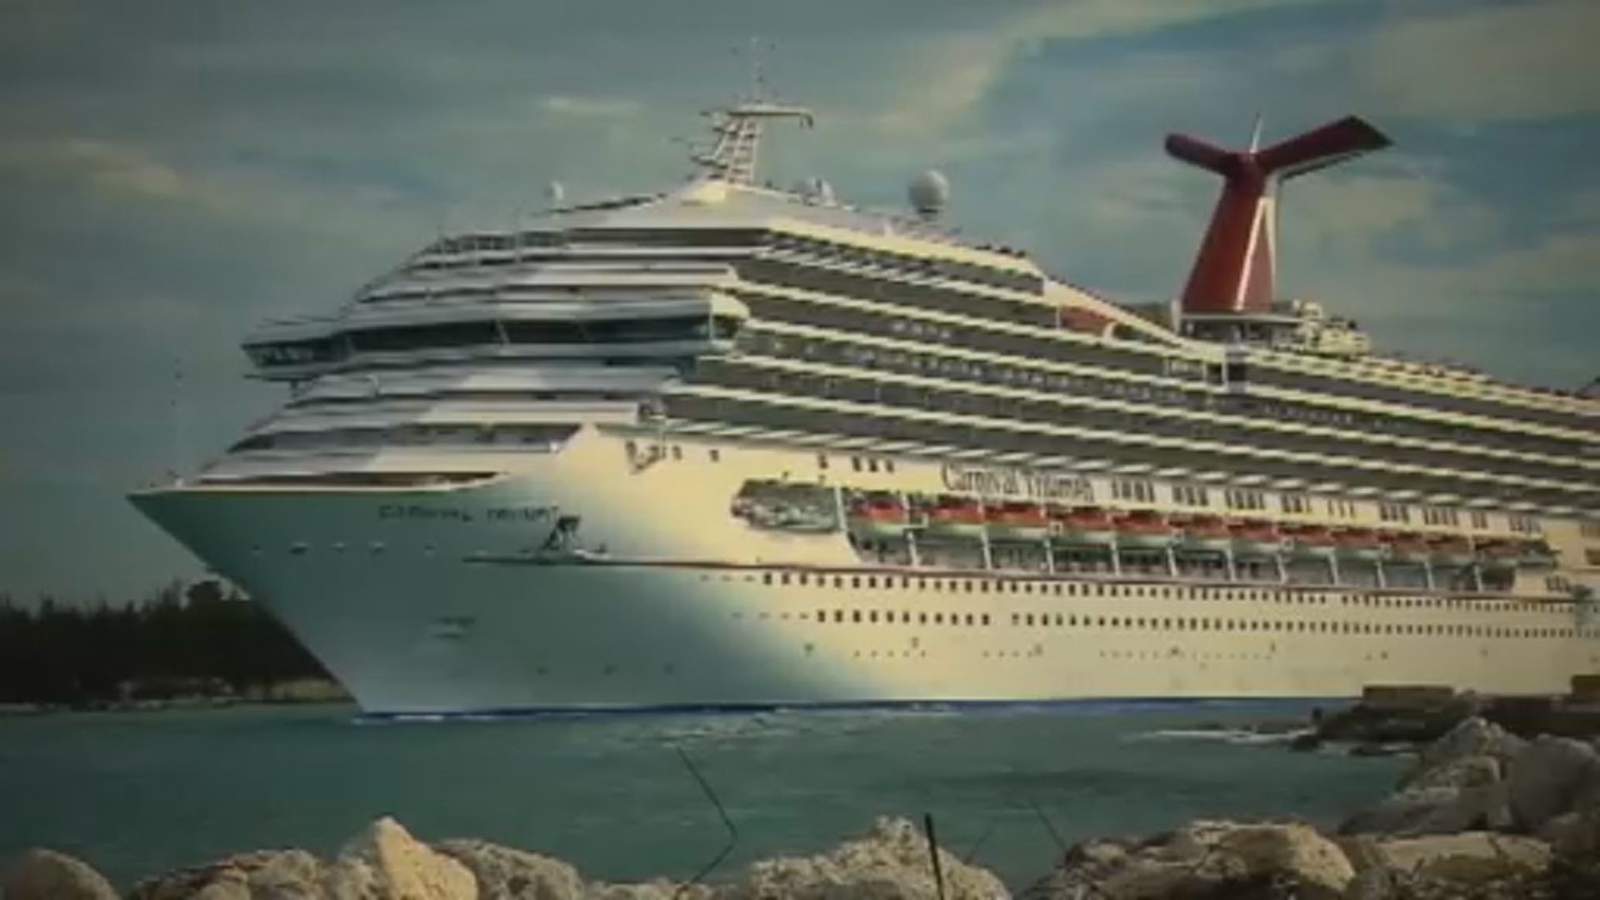 Carnival Cruise Line cancels all cruises set to sail out of Galveston for 2020 due to COVID-19 concerns